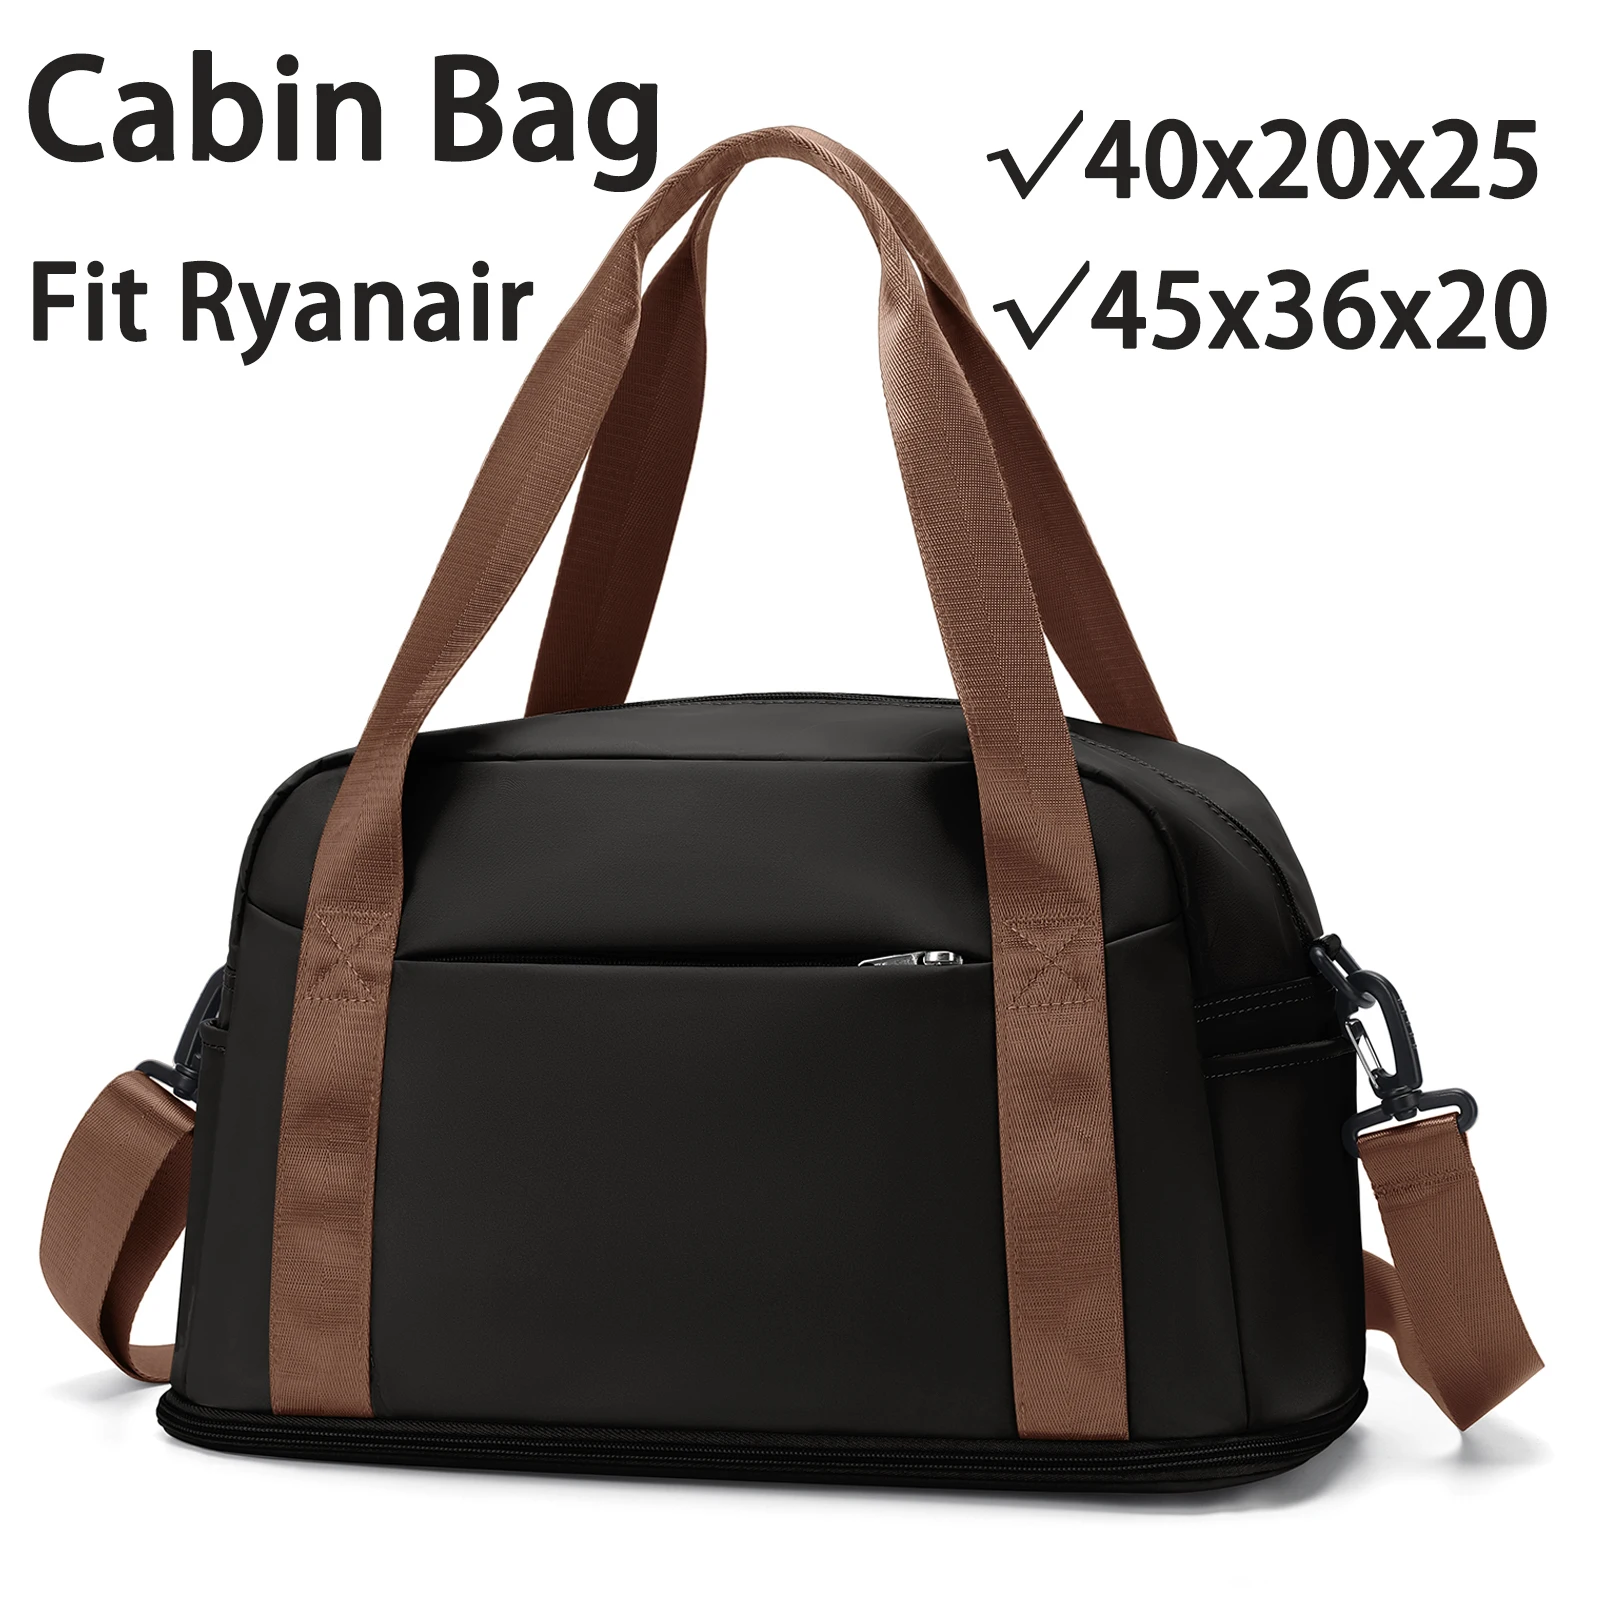 Cabin Bag 40x20x25 Ryanair, 45x36x20 Large Maximum Hand Luggage for Men and Women, Sports Tote Weekender Bag, Travel Duffel Bag-animated-img